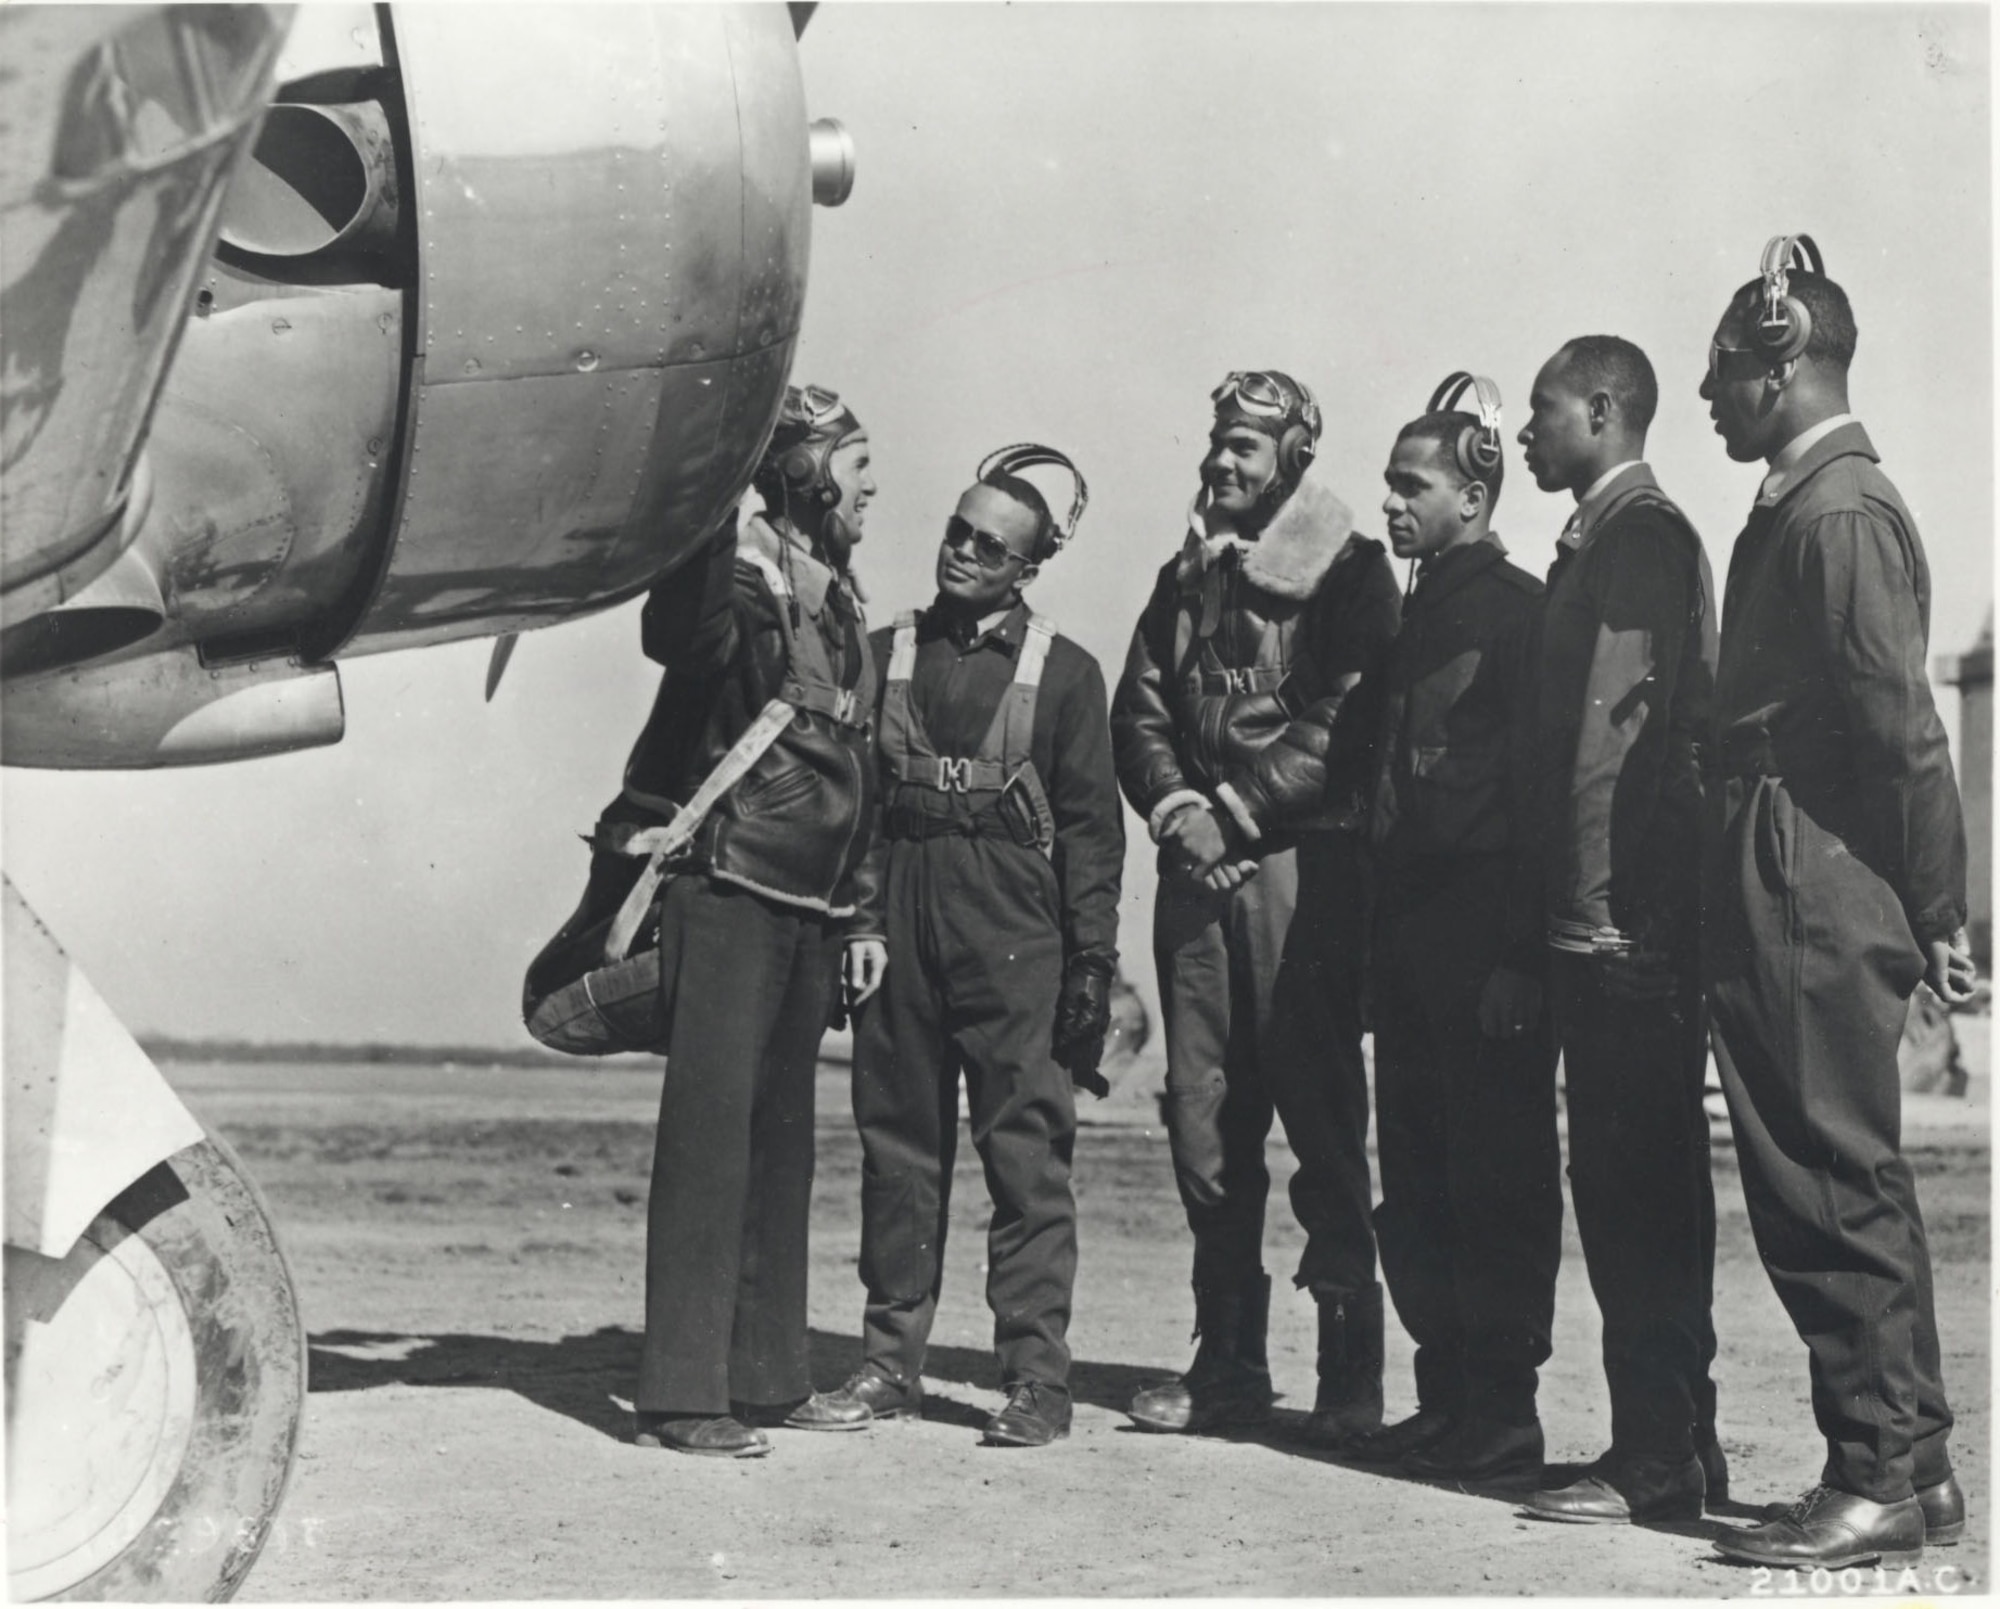 Members of the first pilot class at the advanced flying school at Tuskegee, Alabama, listening to their instructor, 1942.